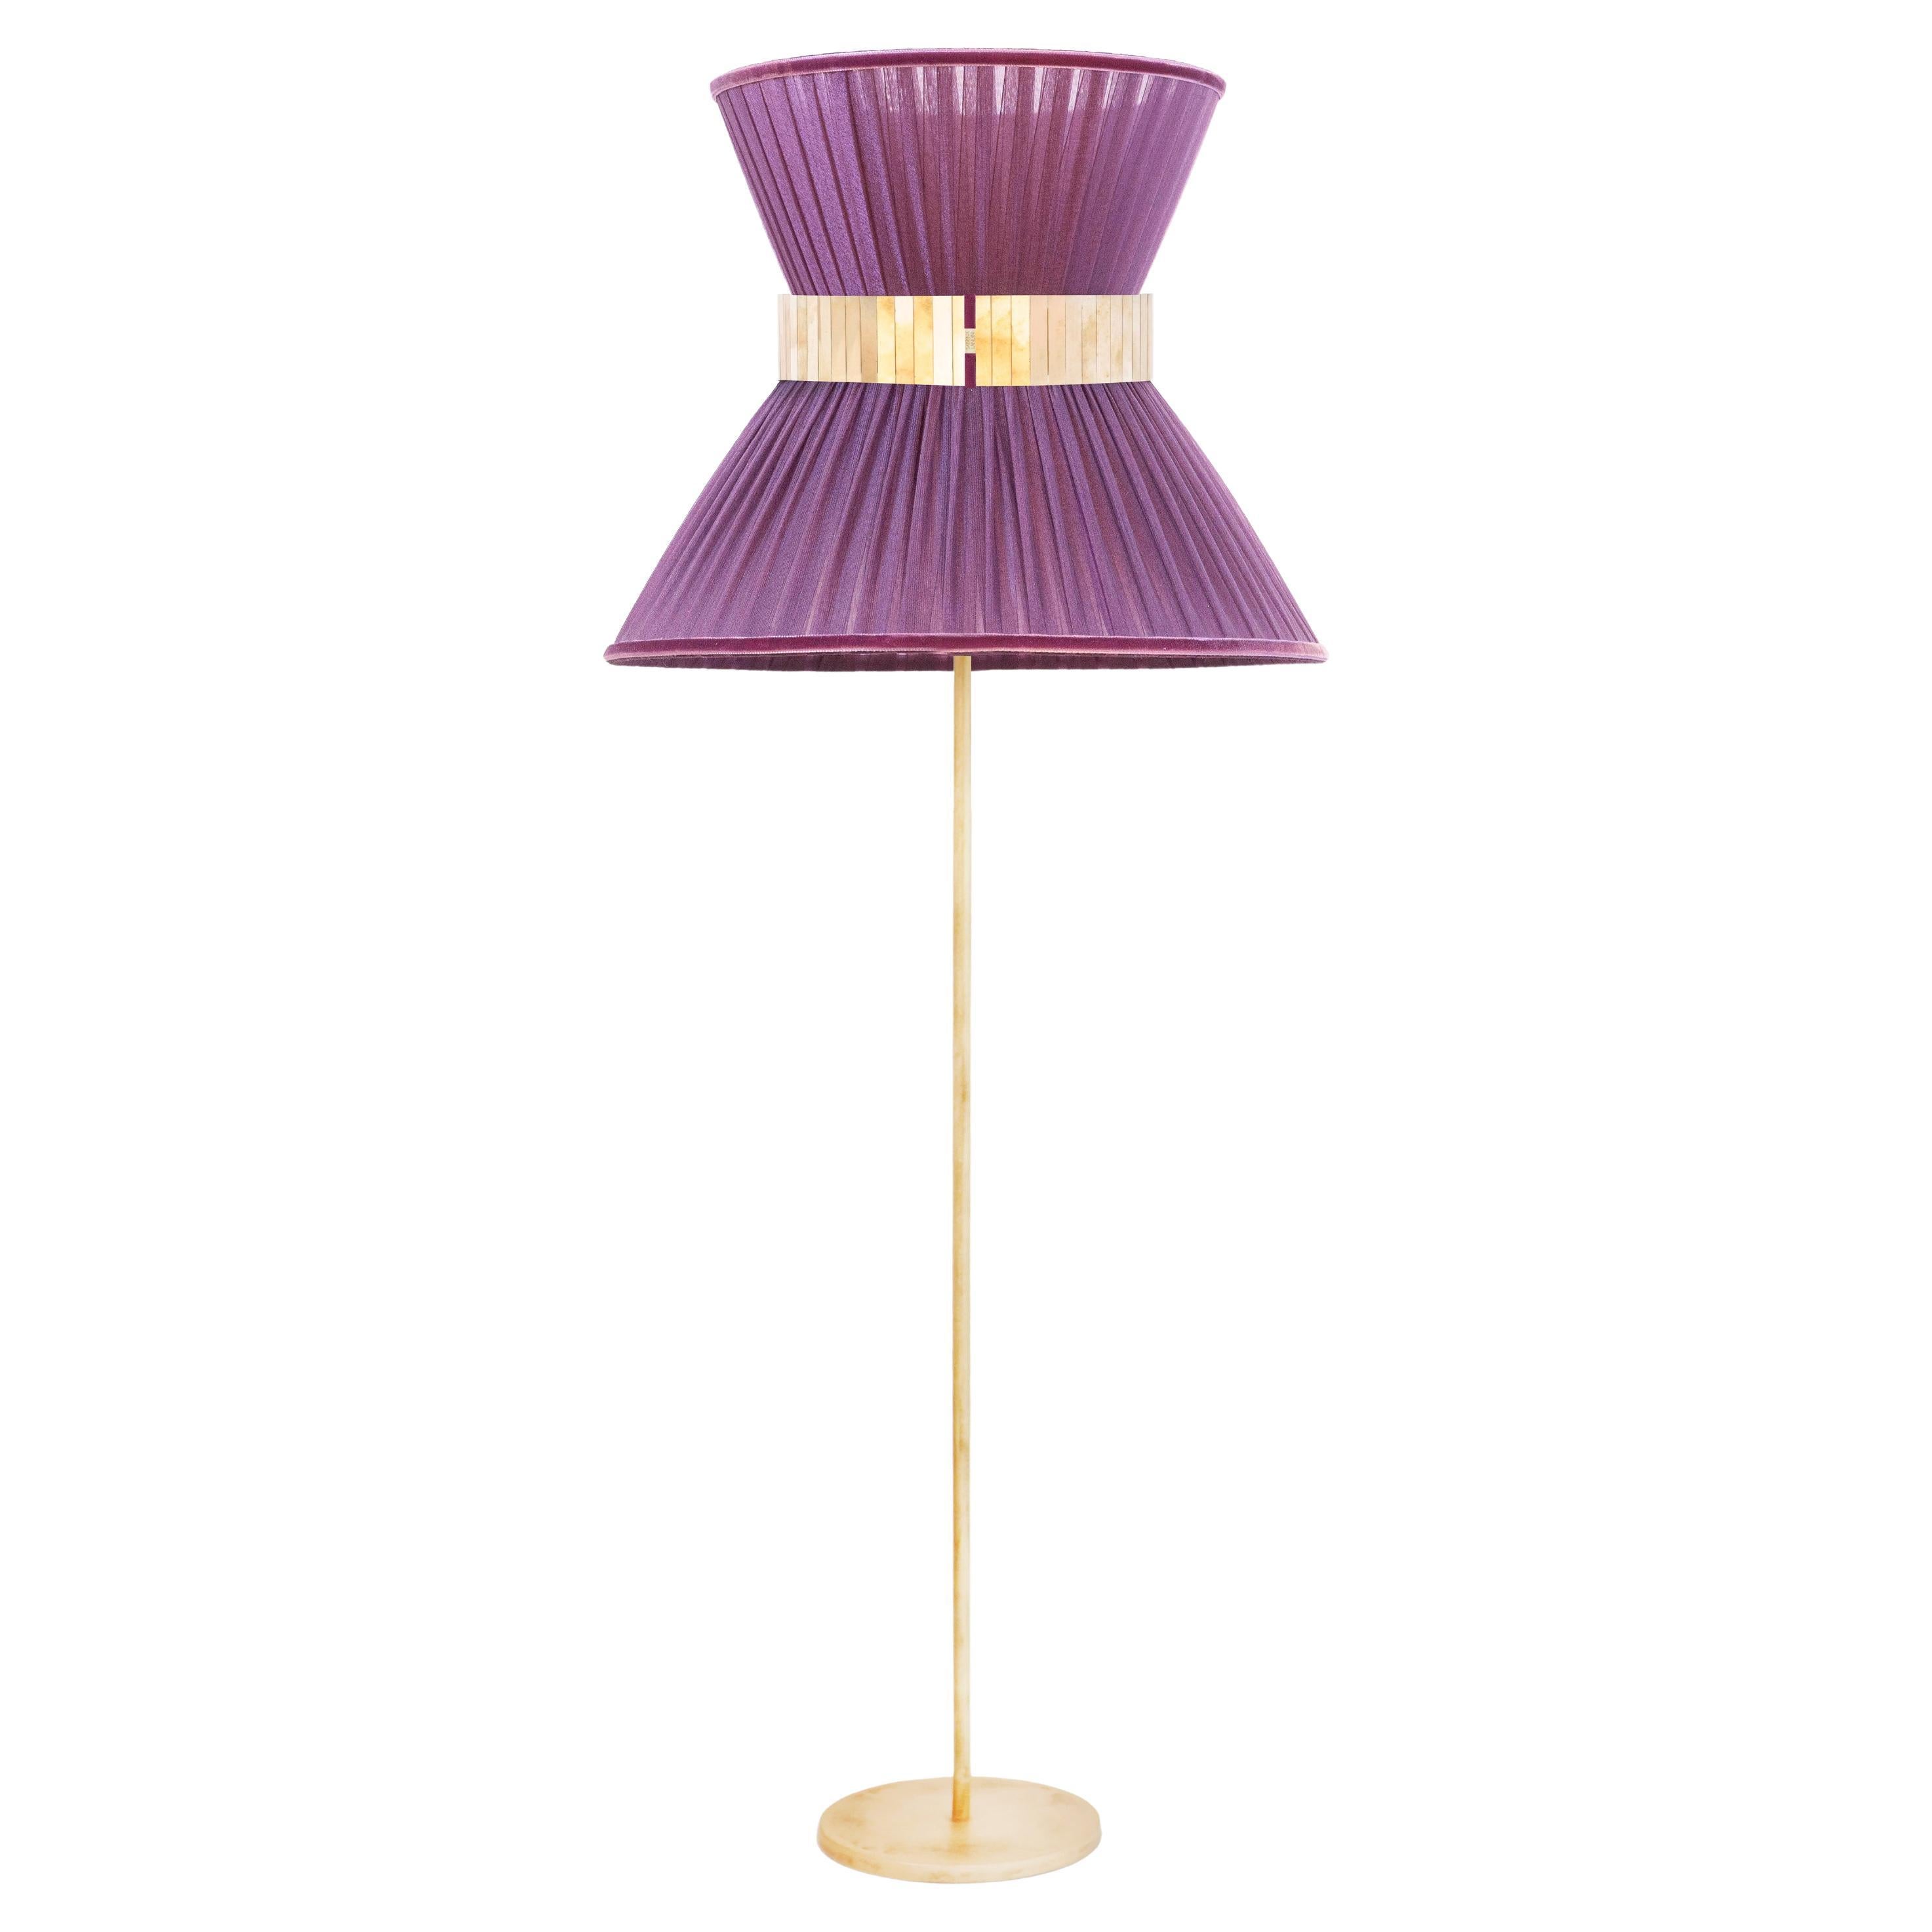 Tiffany Contemporary Floor Lamp 80 Purple Silk, Antiqued Brass, Silvered Glass